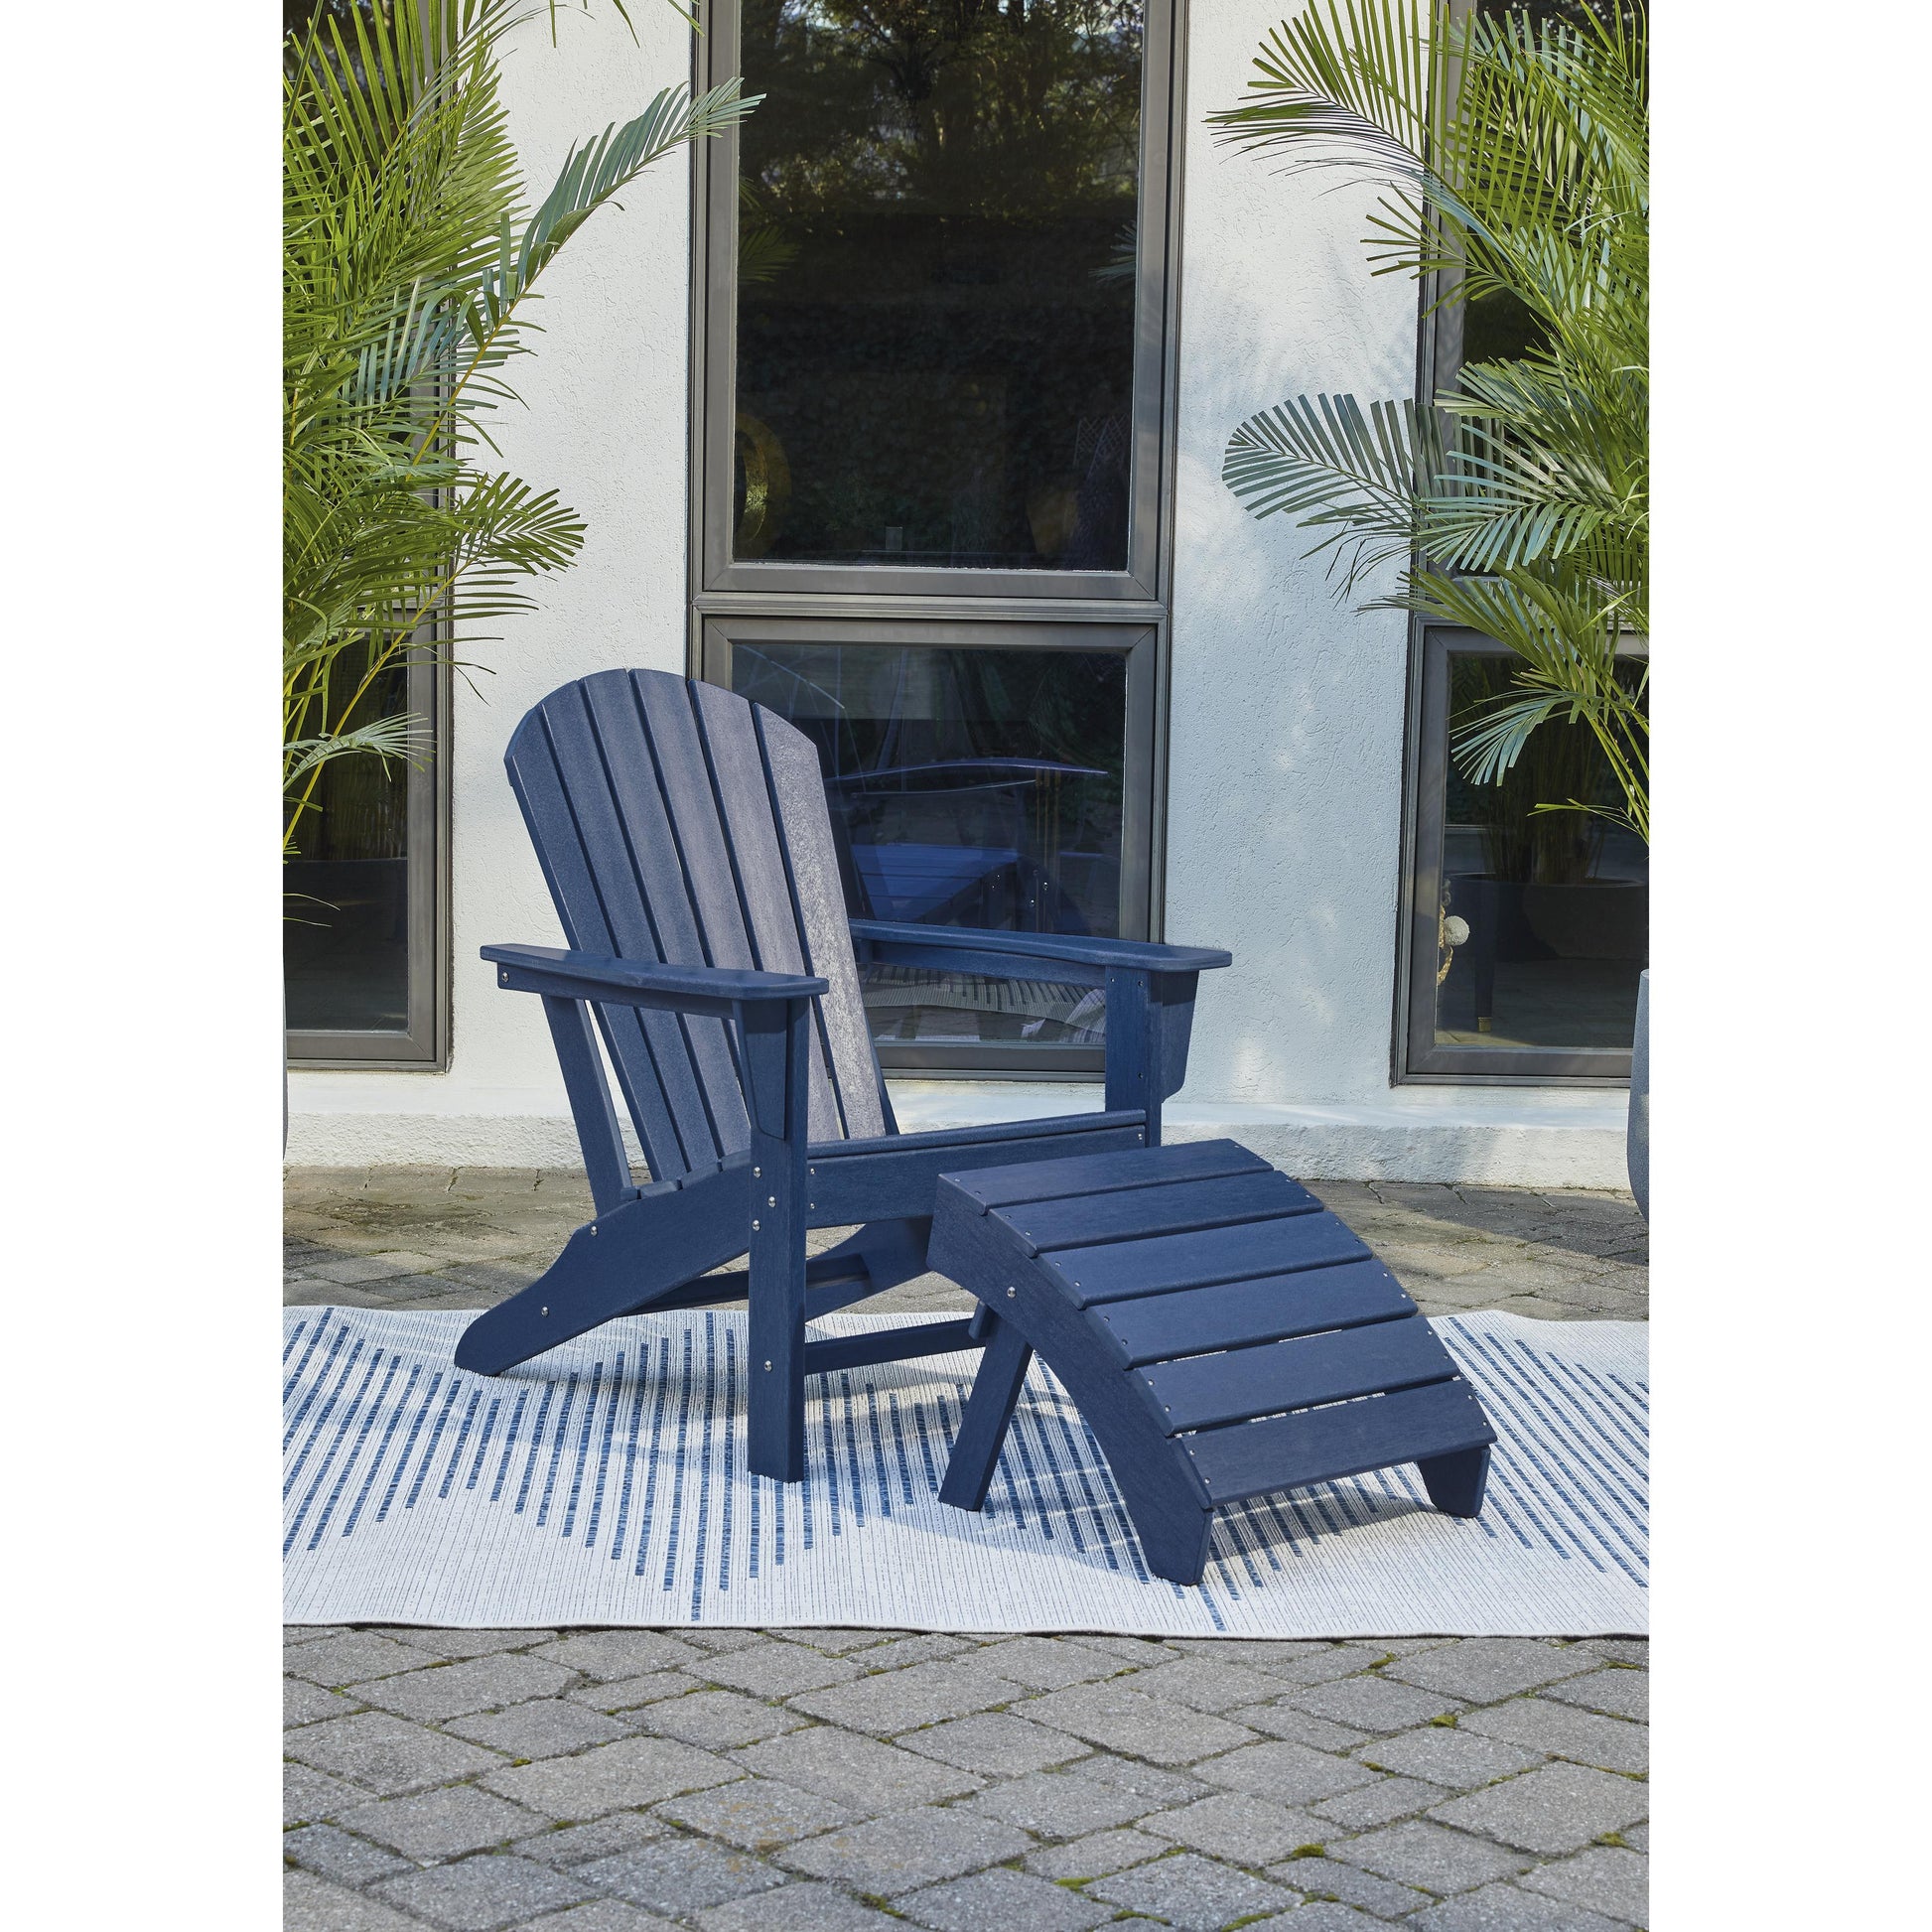 Signature Design by Ashley Outdoor Seating Adirondack Chairs P009-898 IMAGE 12